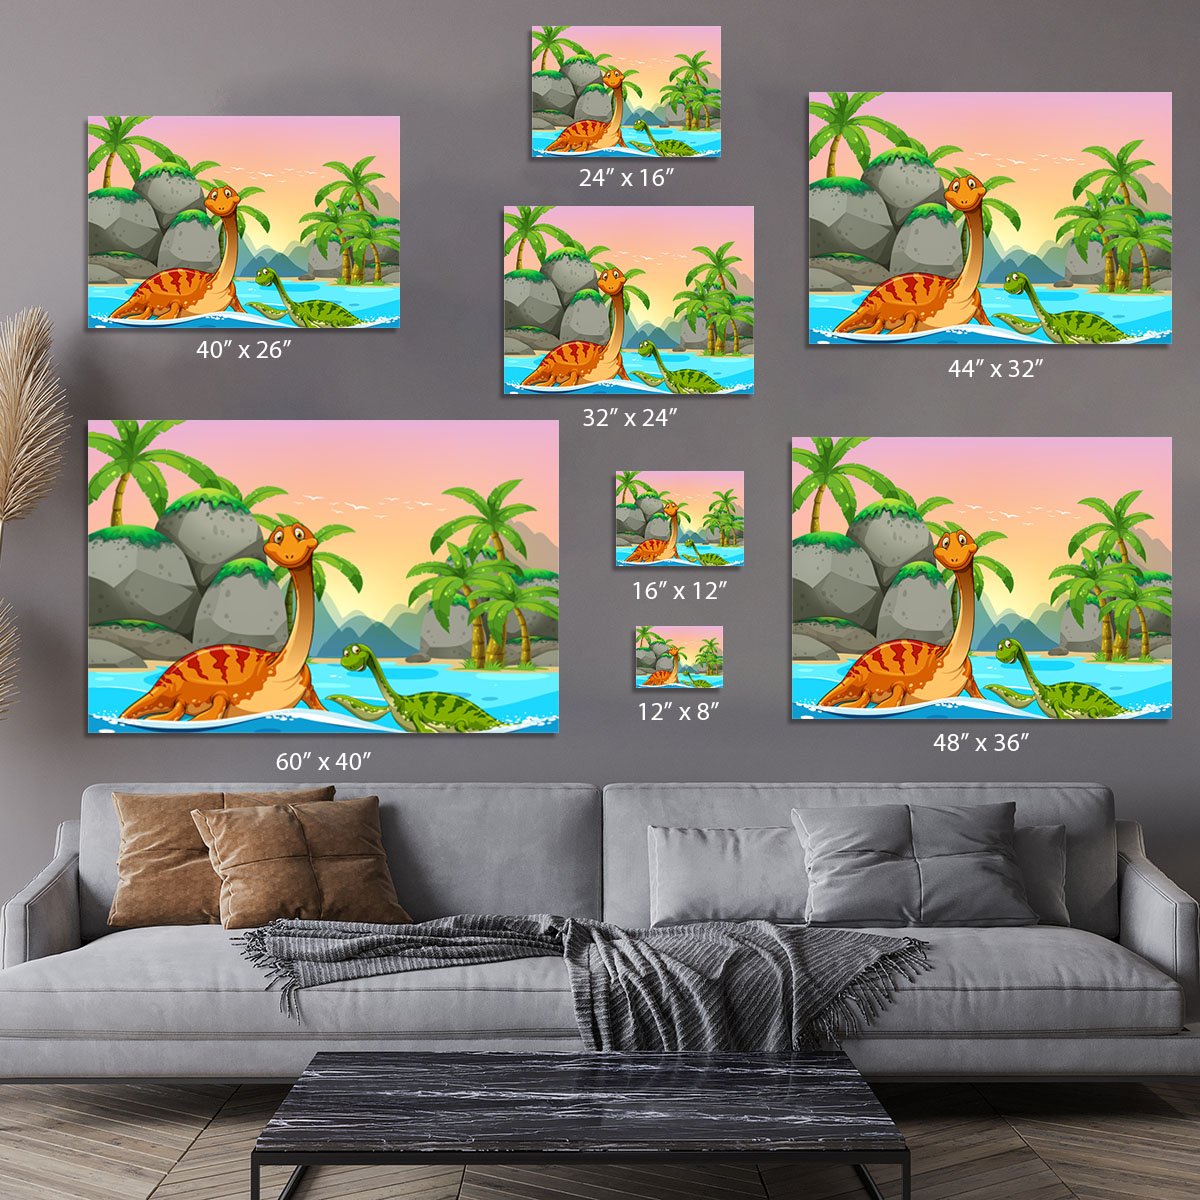 Dinosaurs living in the ocean Canvas Print or Poster